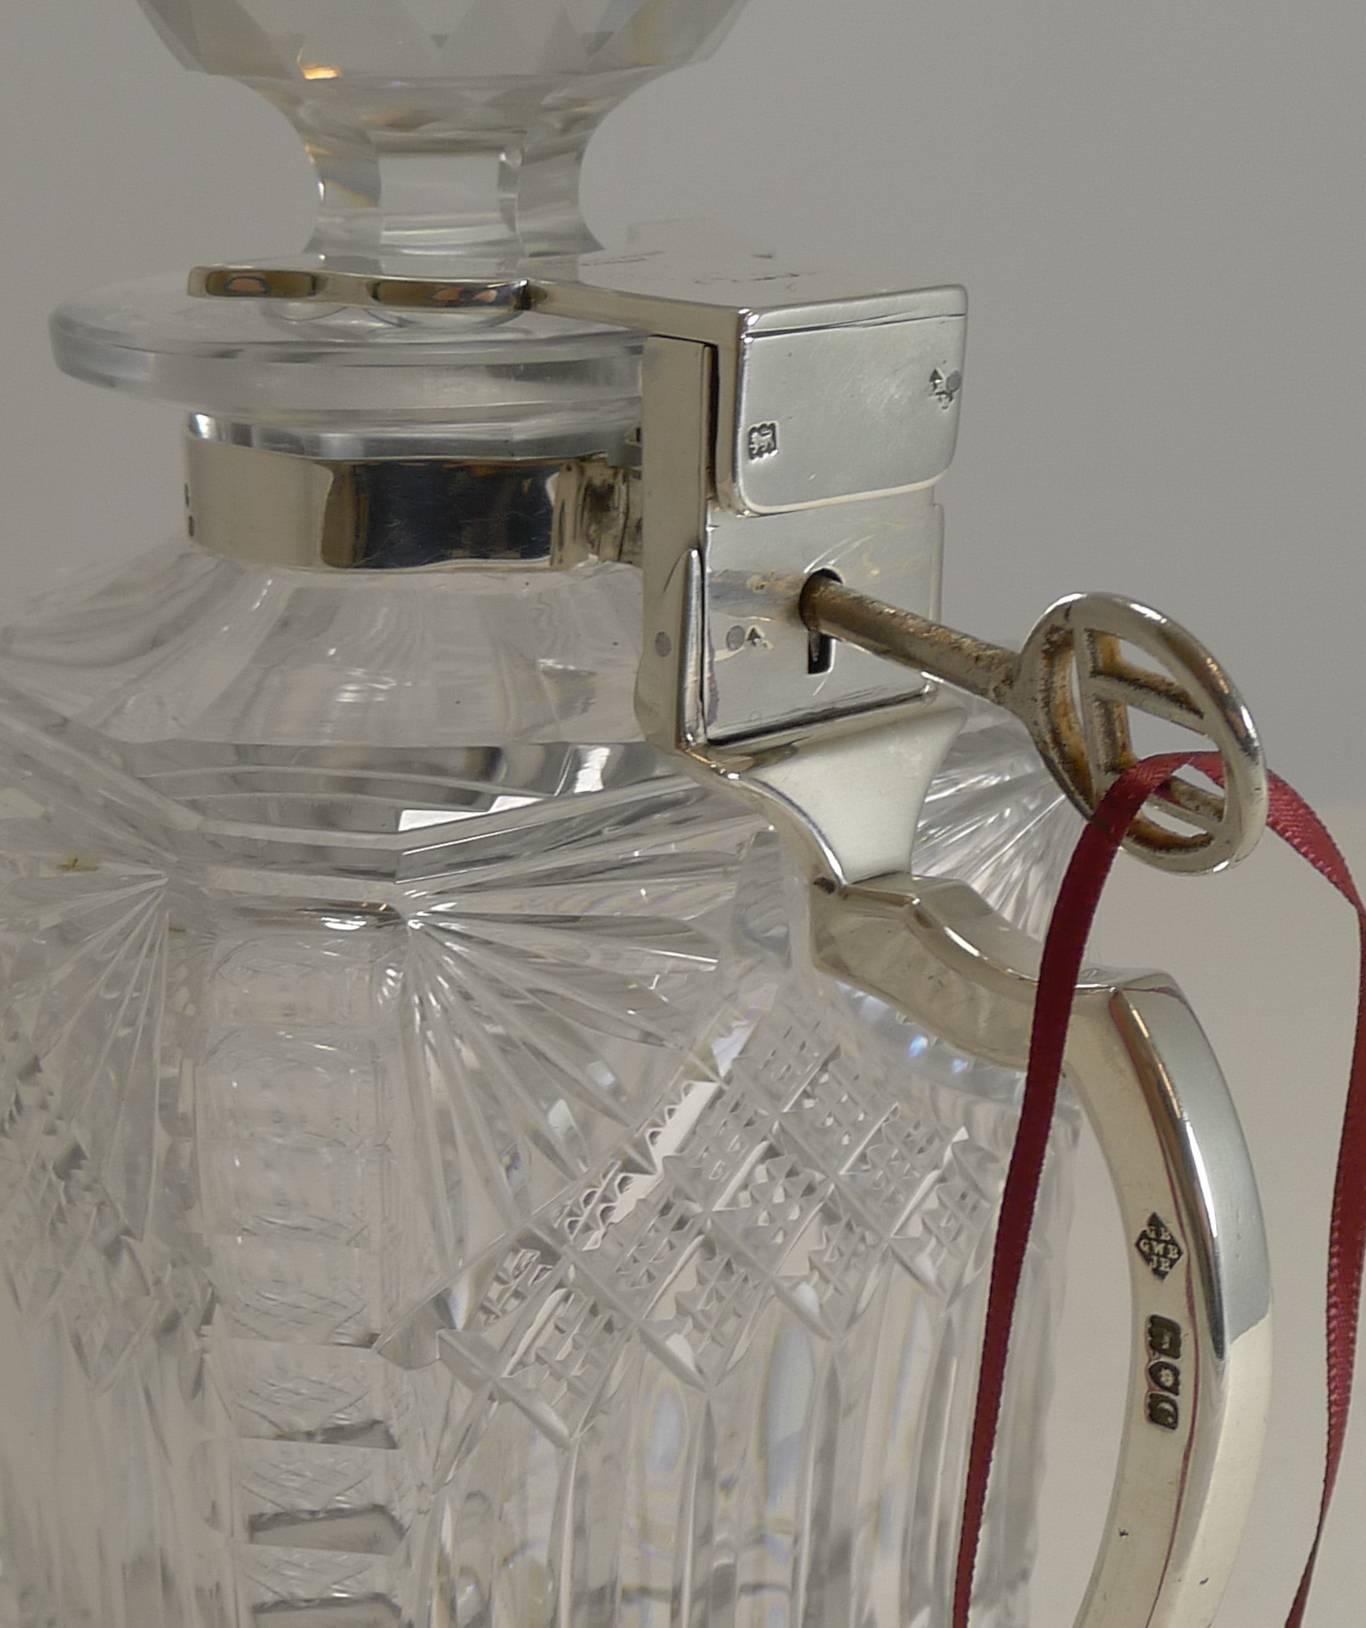 A scarce find, this Victorian Betjemann's Patent single locking decanter or tantalus is made from cut crystal and trimmed in solid sterling silver fittings.

The whisky decanter is beautifully cut and in undamaged condition. The fittings are fully